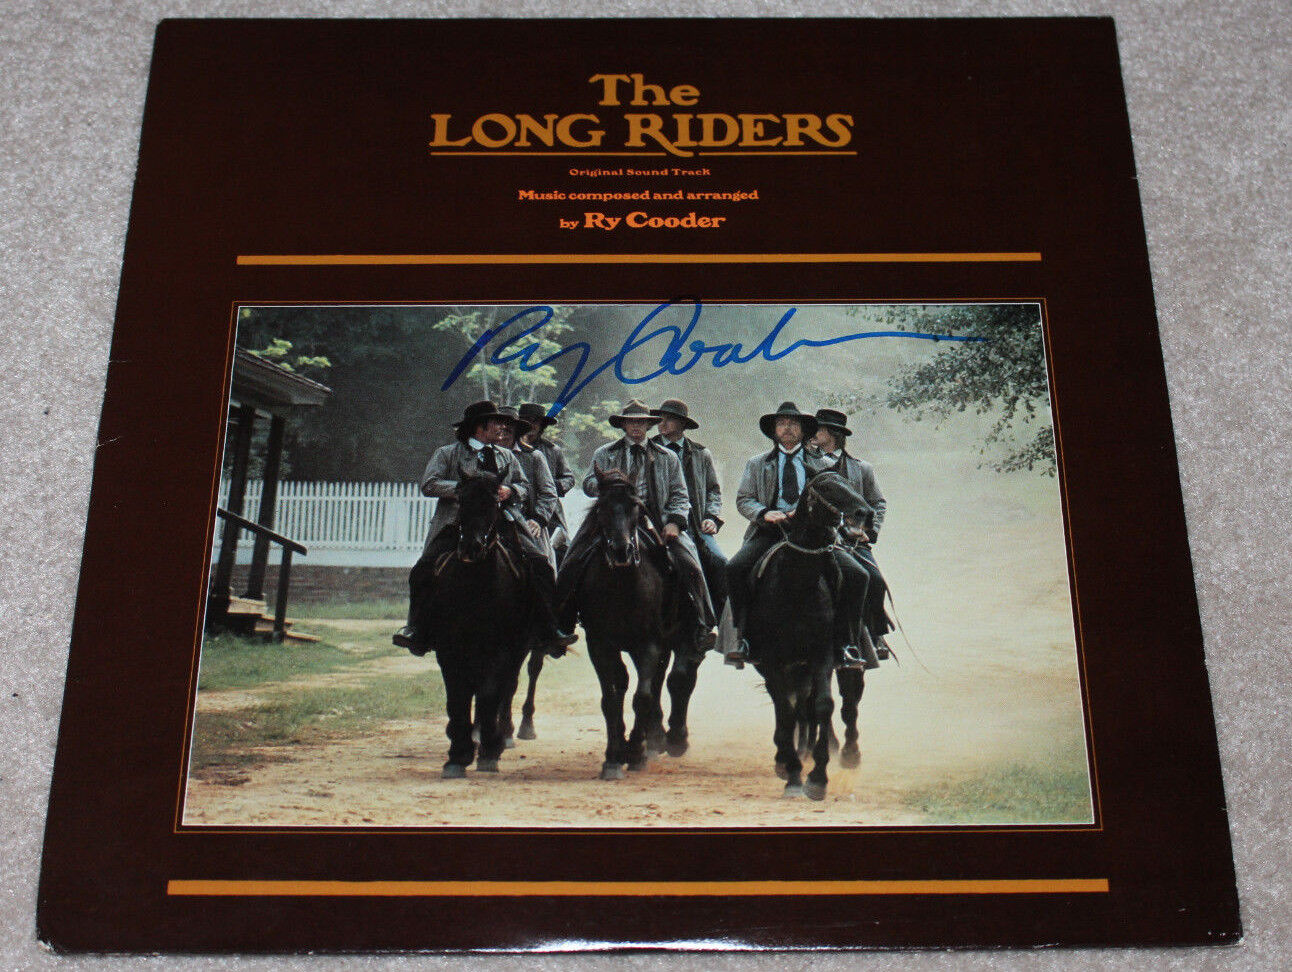 SINGER RY COODER SIGNED AUTHENTIC THE LONG RIDERS RECORD ALBUM L